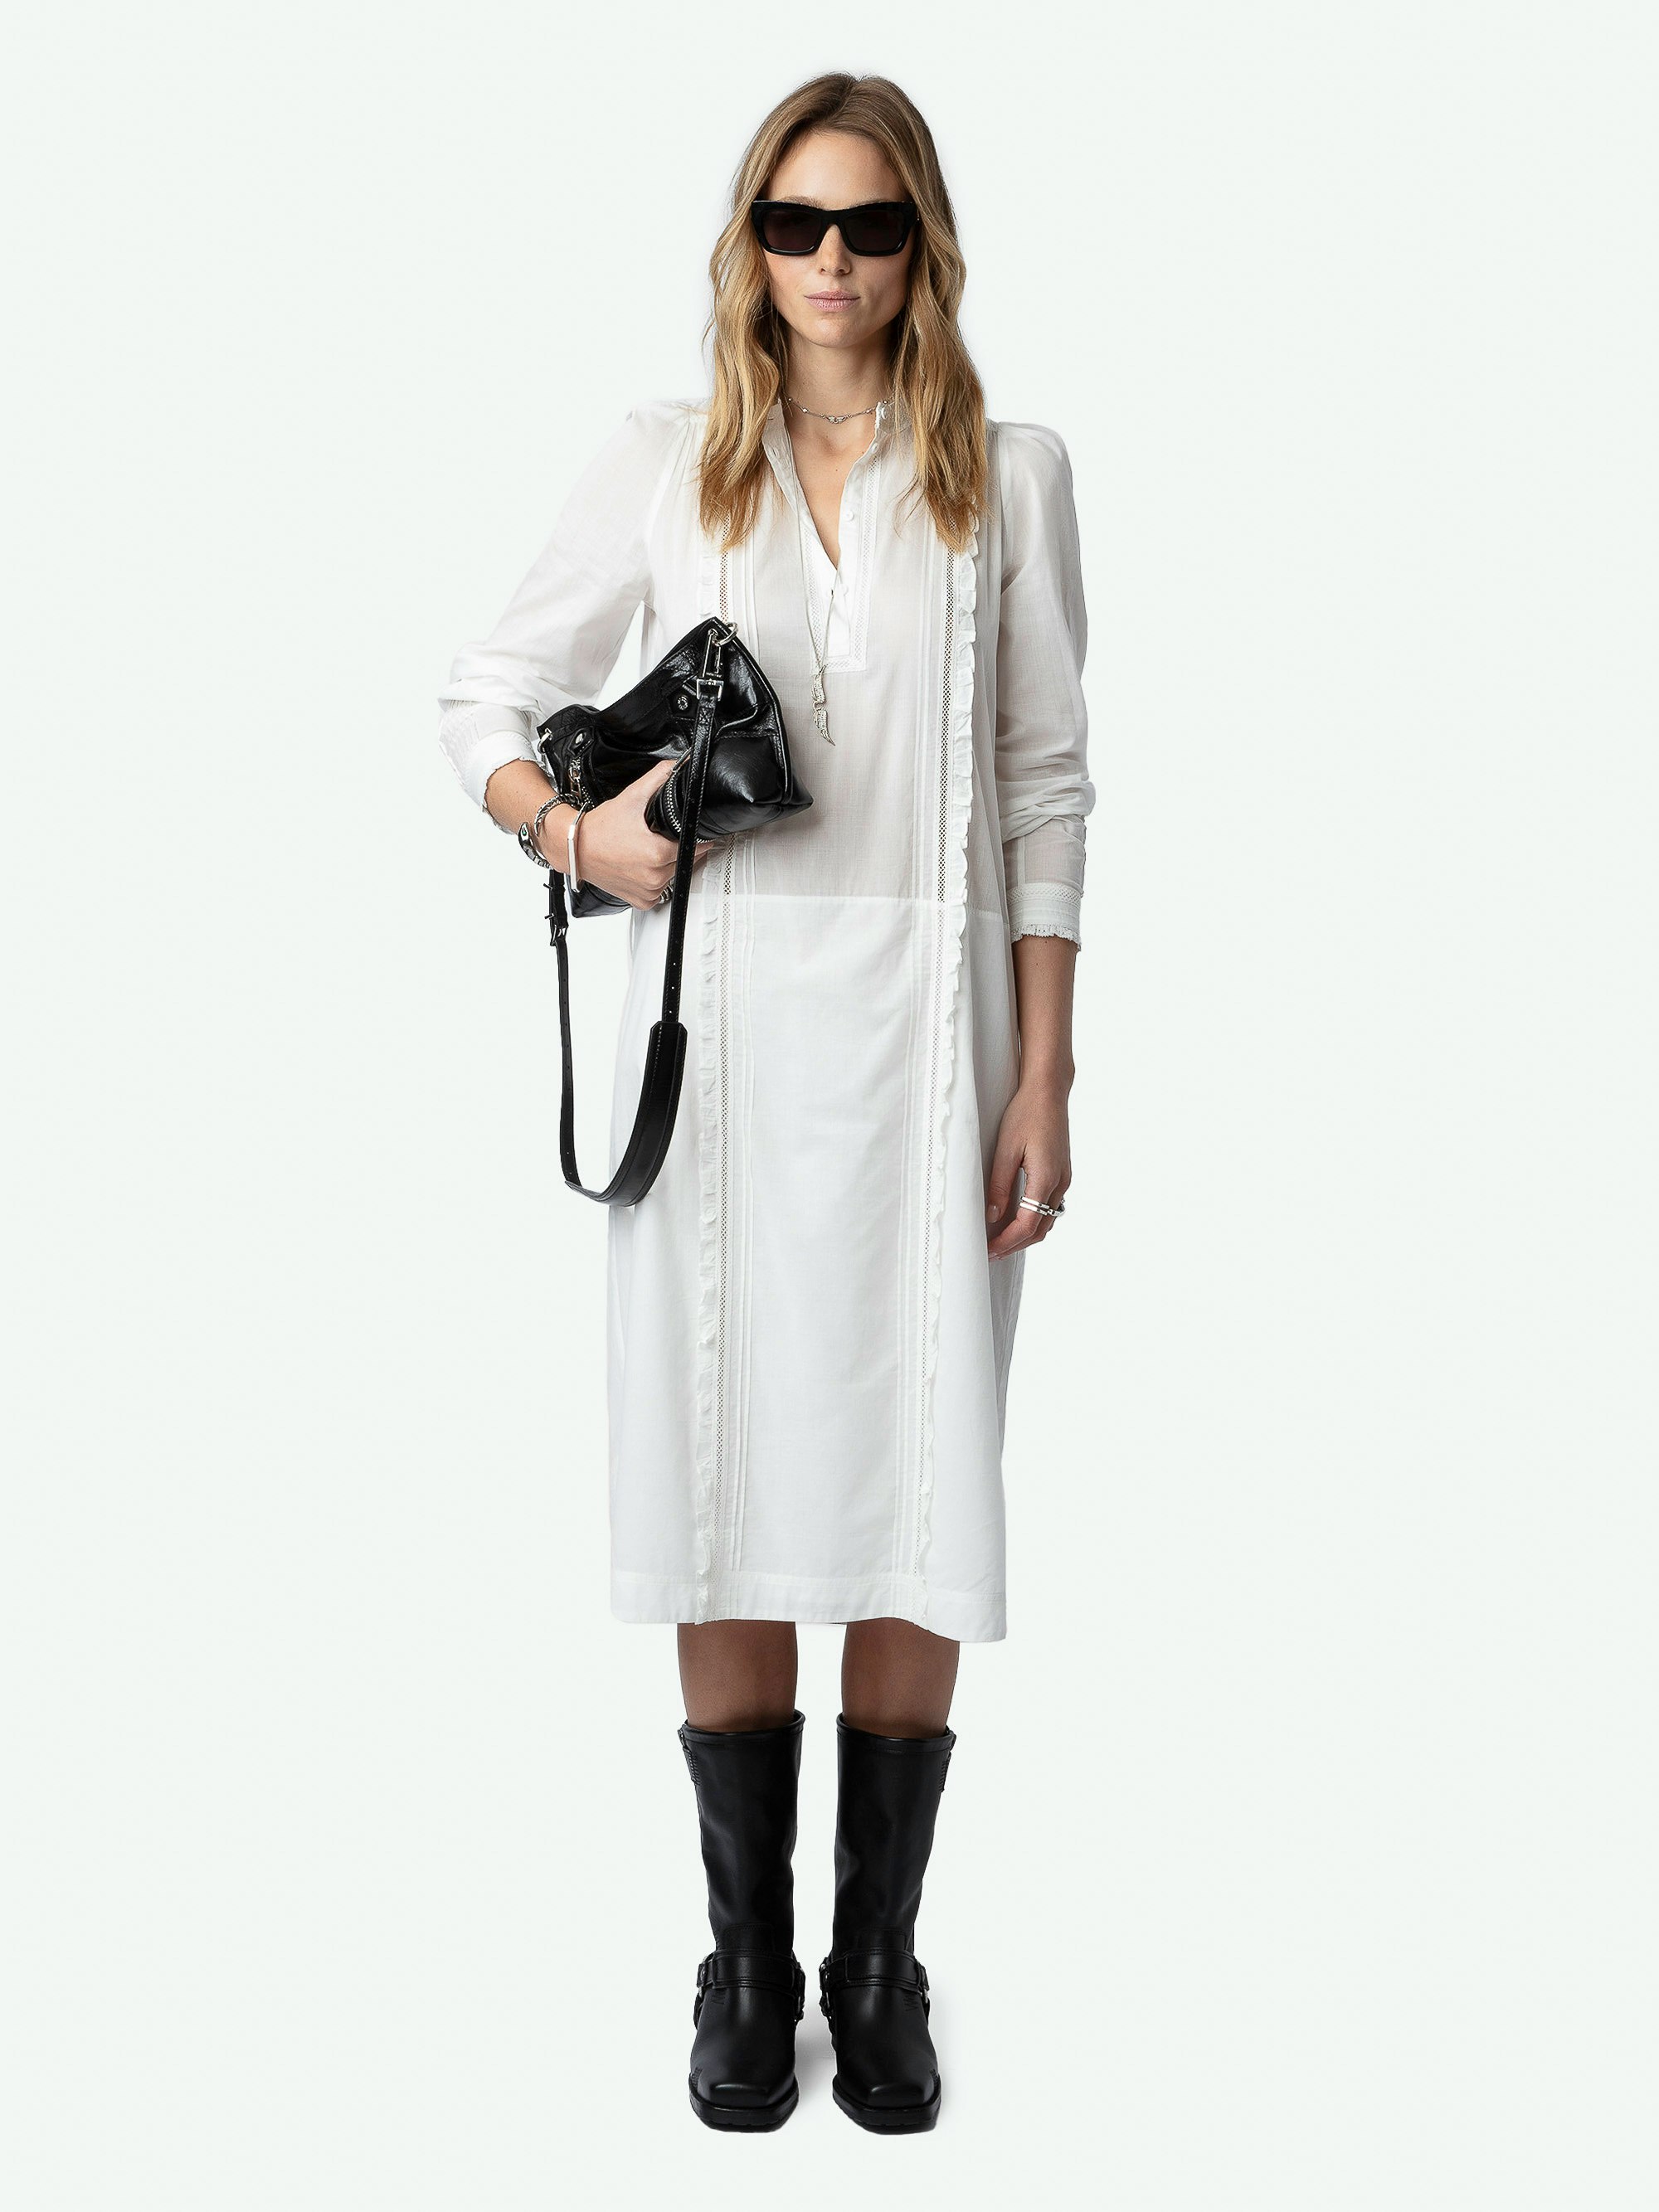 Ritchil Dress - Long-sleeved white cotton voile midi dress with removable belt, lace and ruffles.